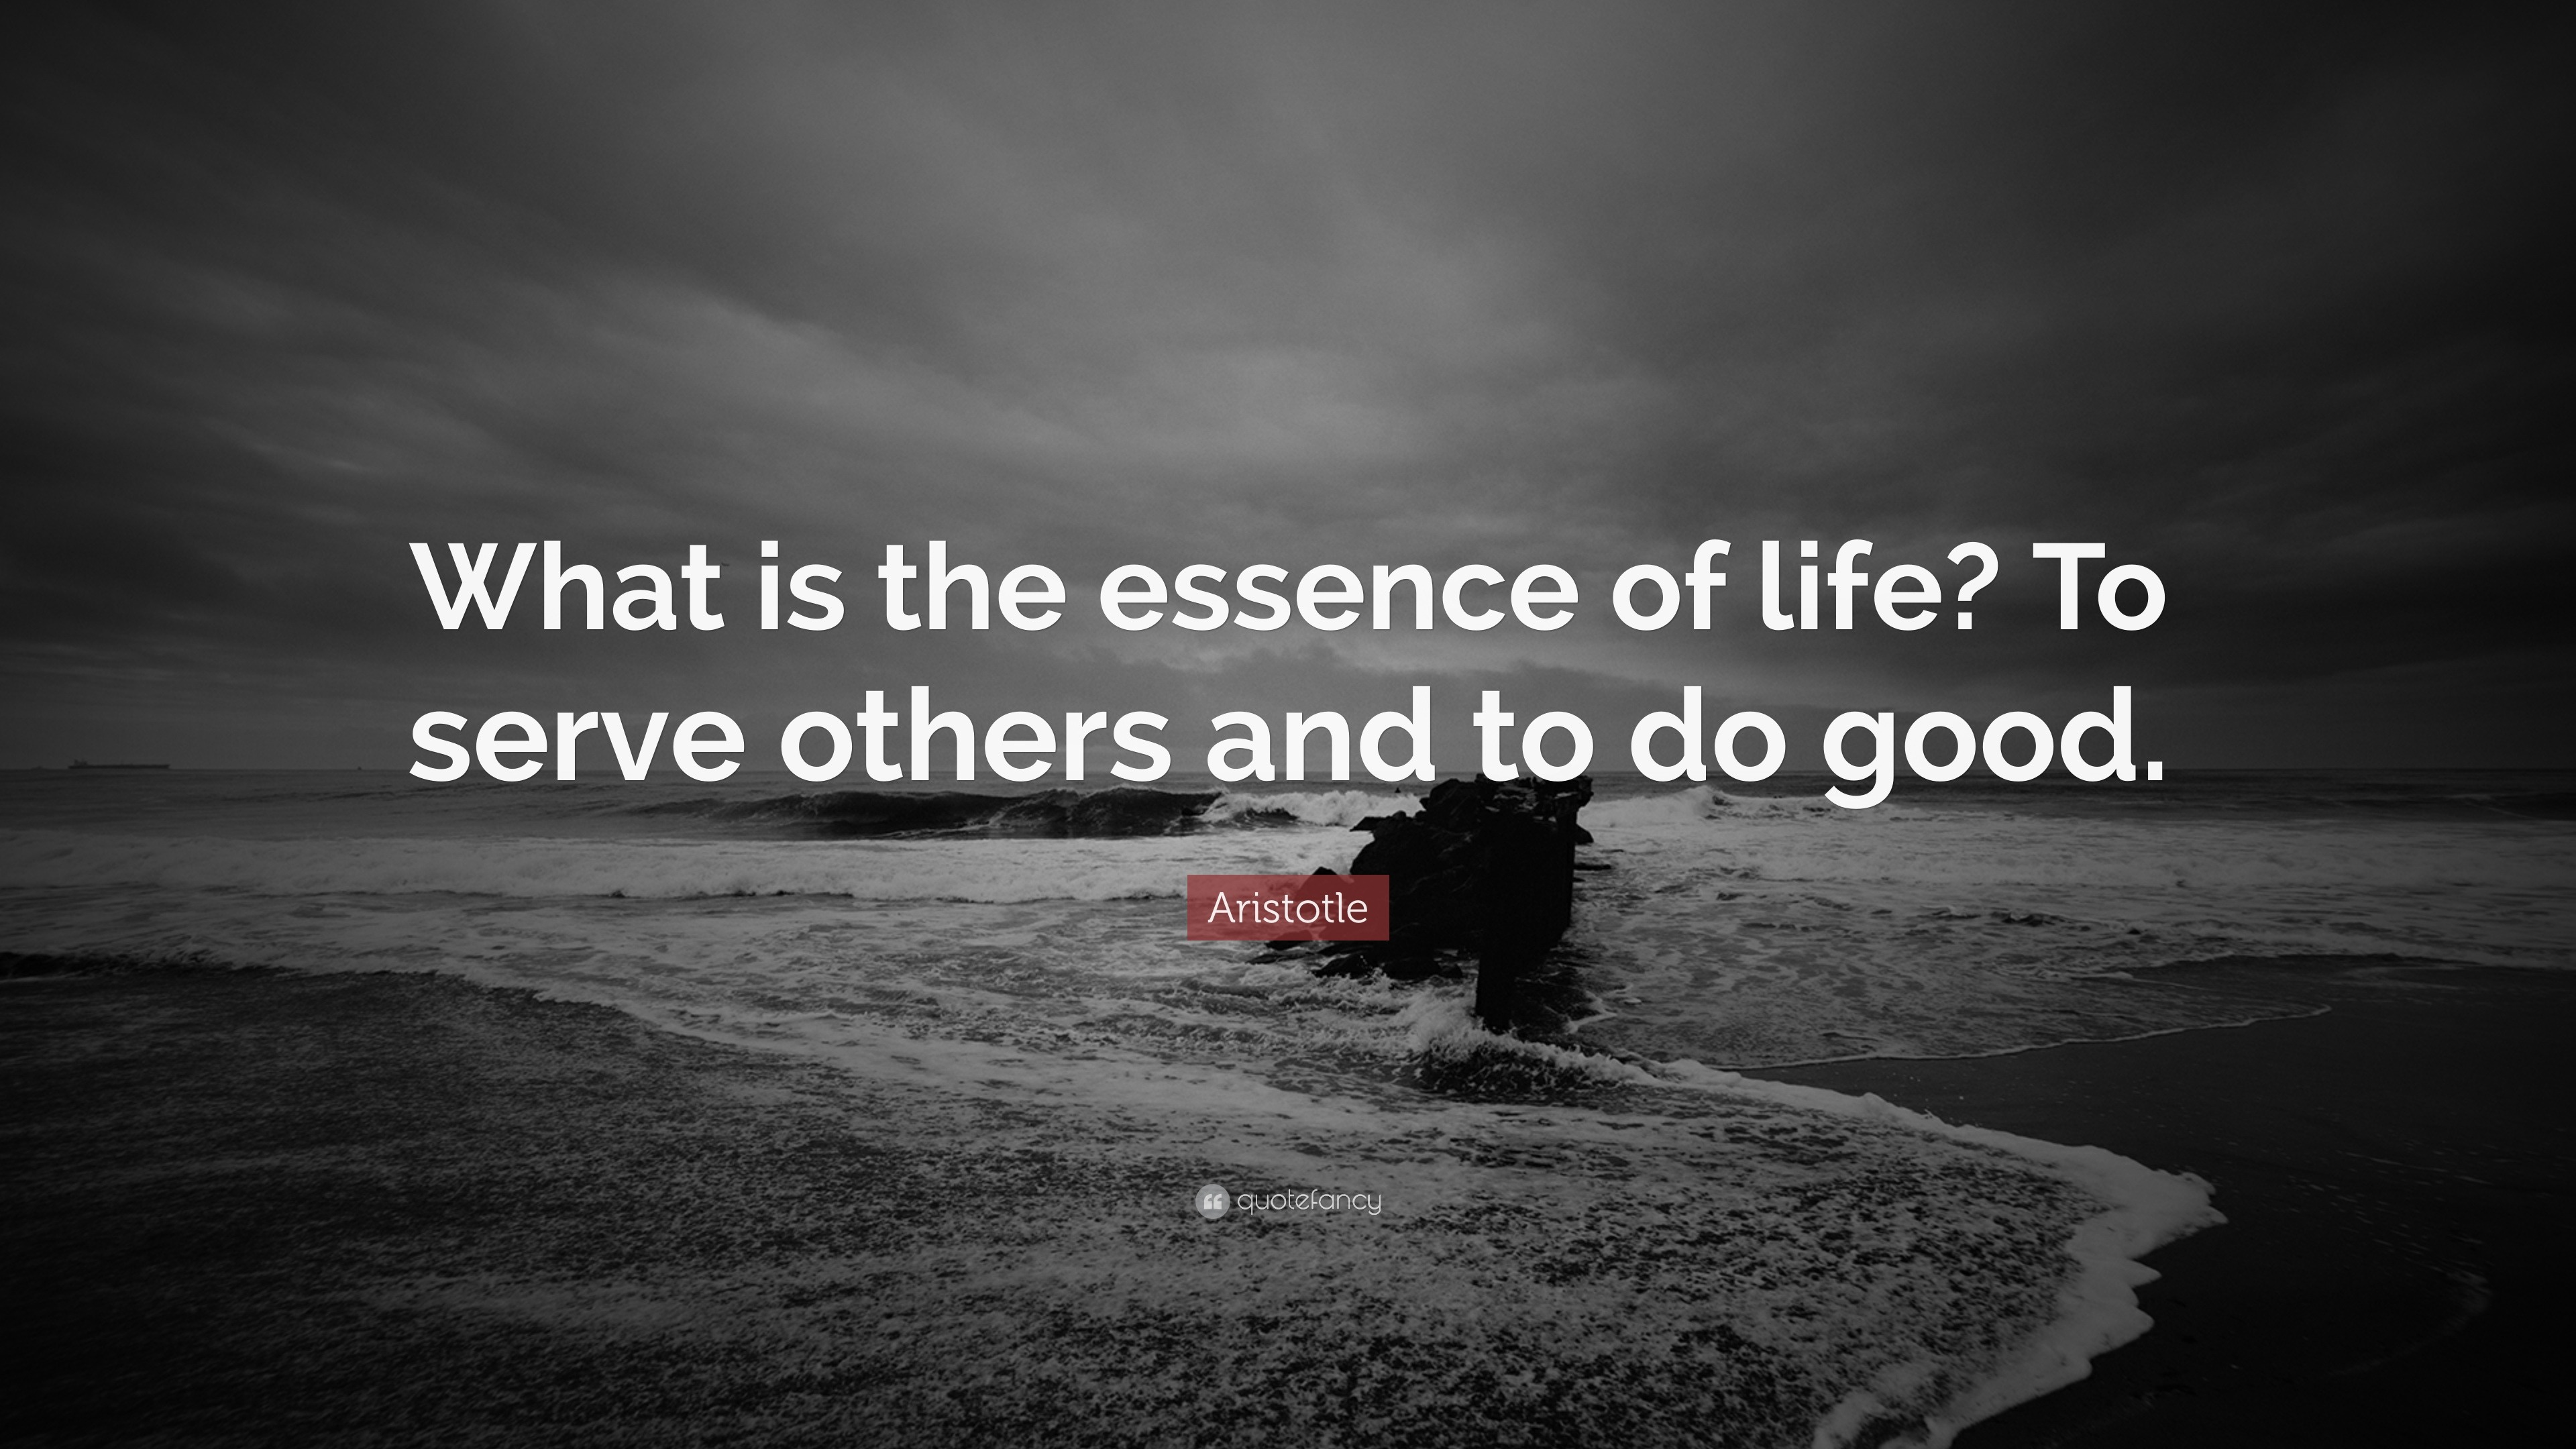 Aristotle Quote “What is the essence of life To serve others and to